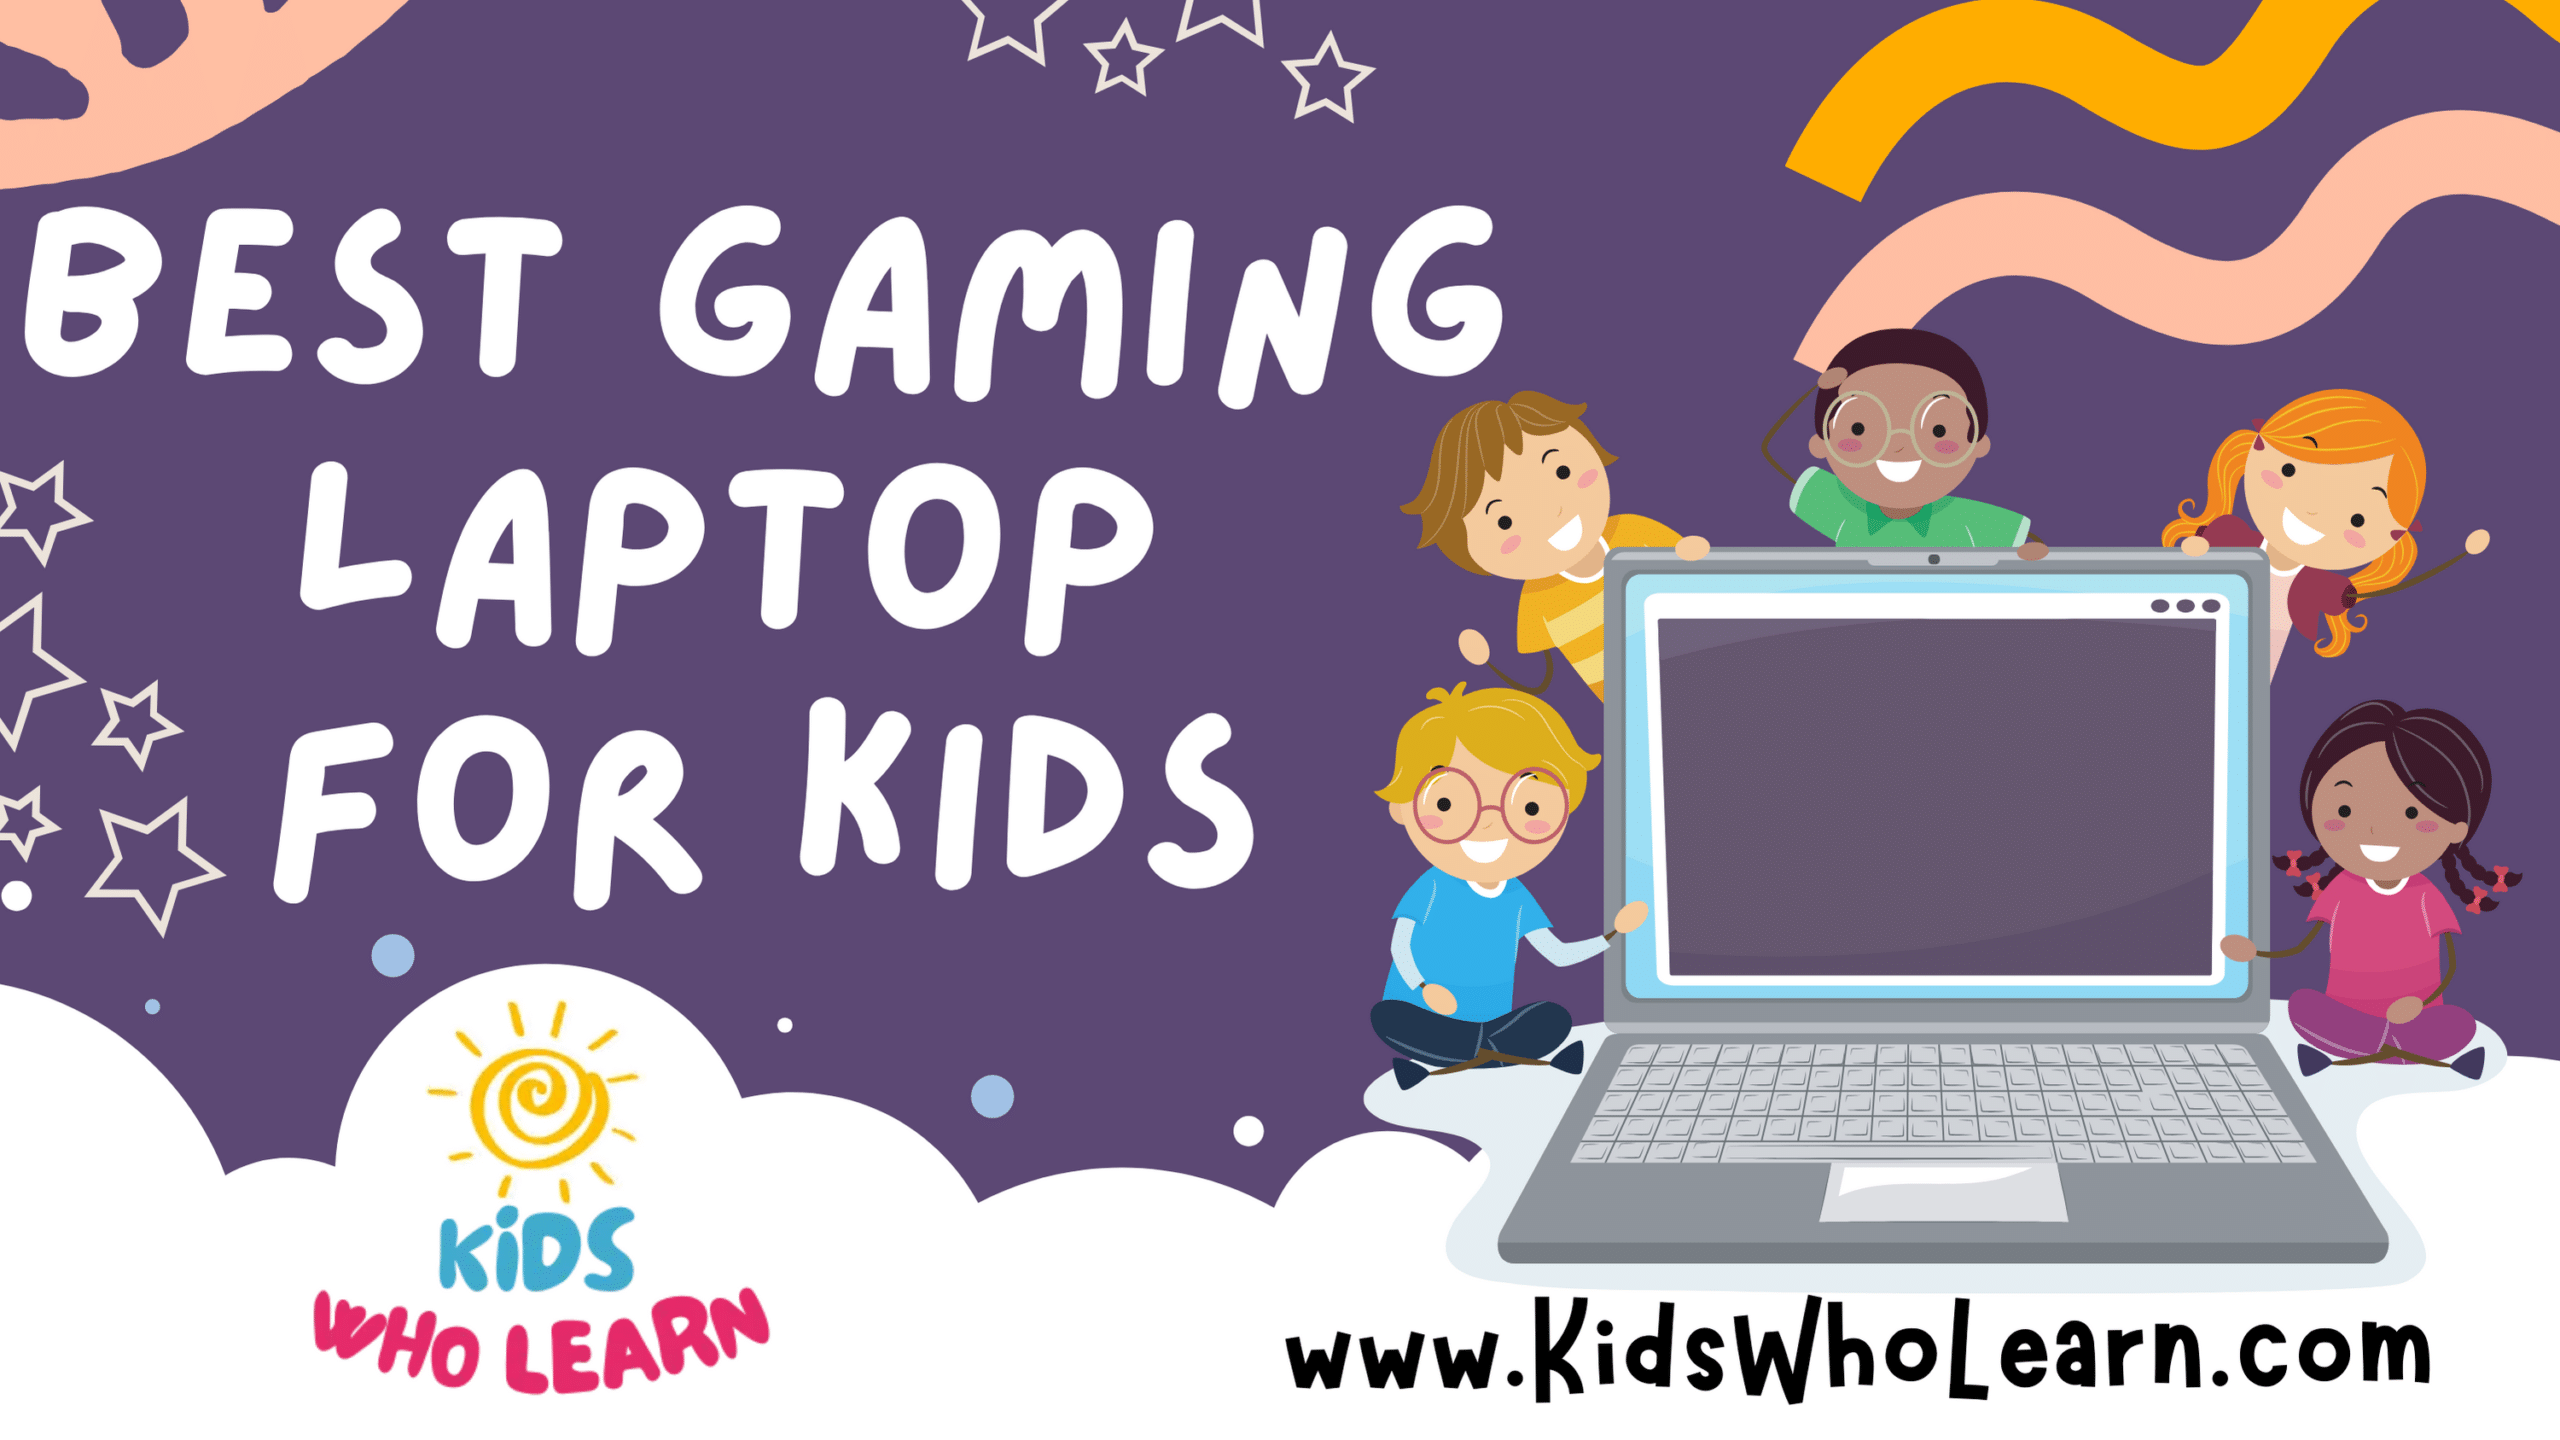 Best Gaming Laptop For Kids